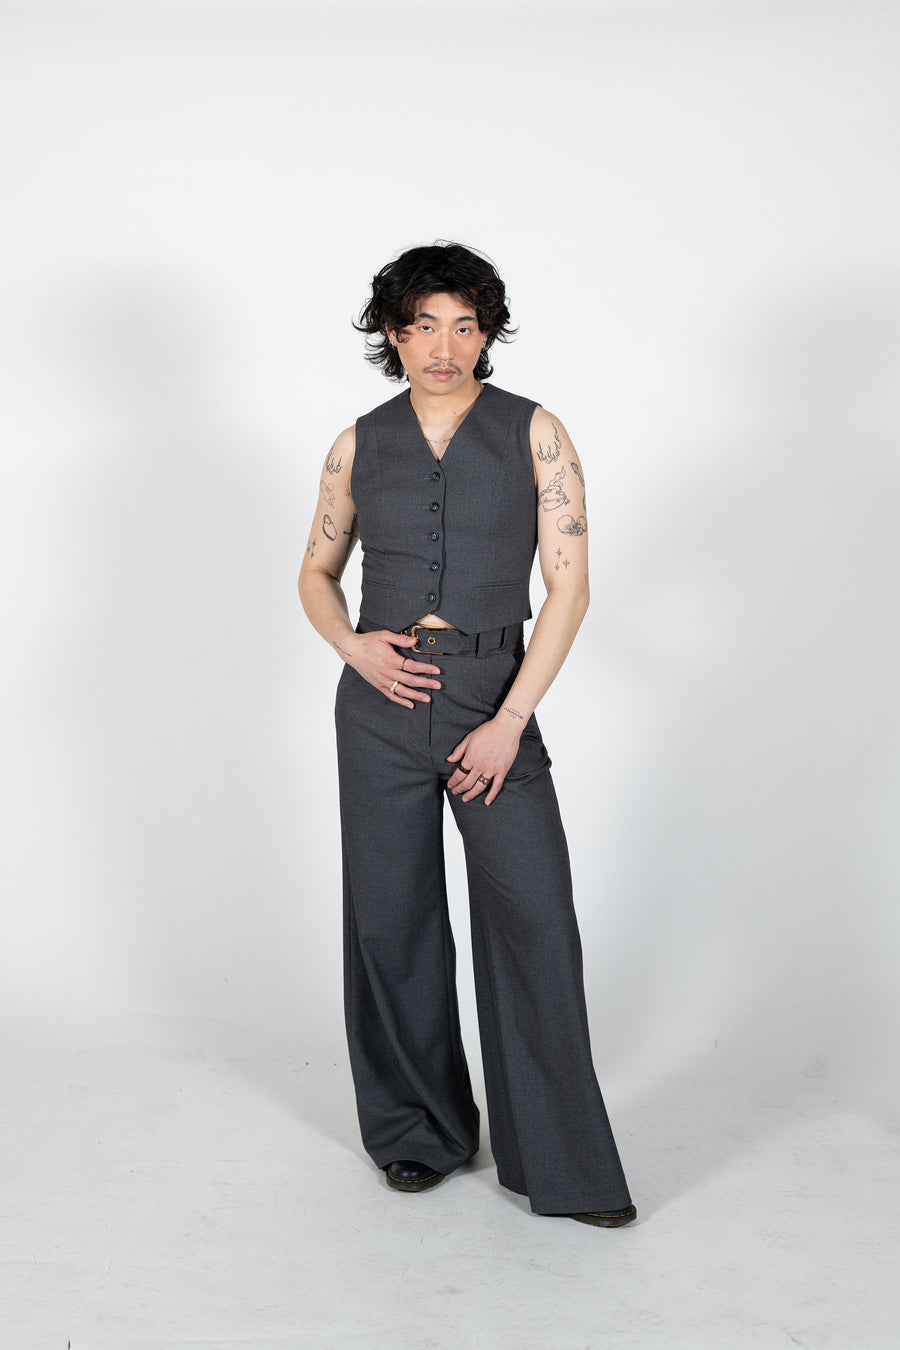 The Acme Vest and Acme Wide Leg Trouser in grey by Australian designer label, House of Campbell.